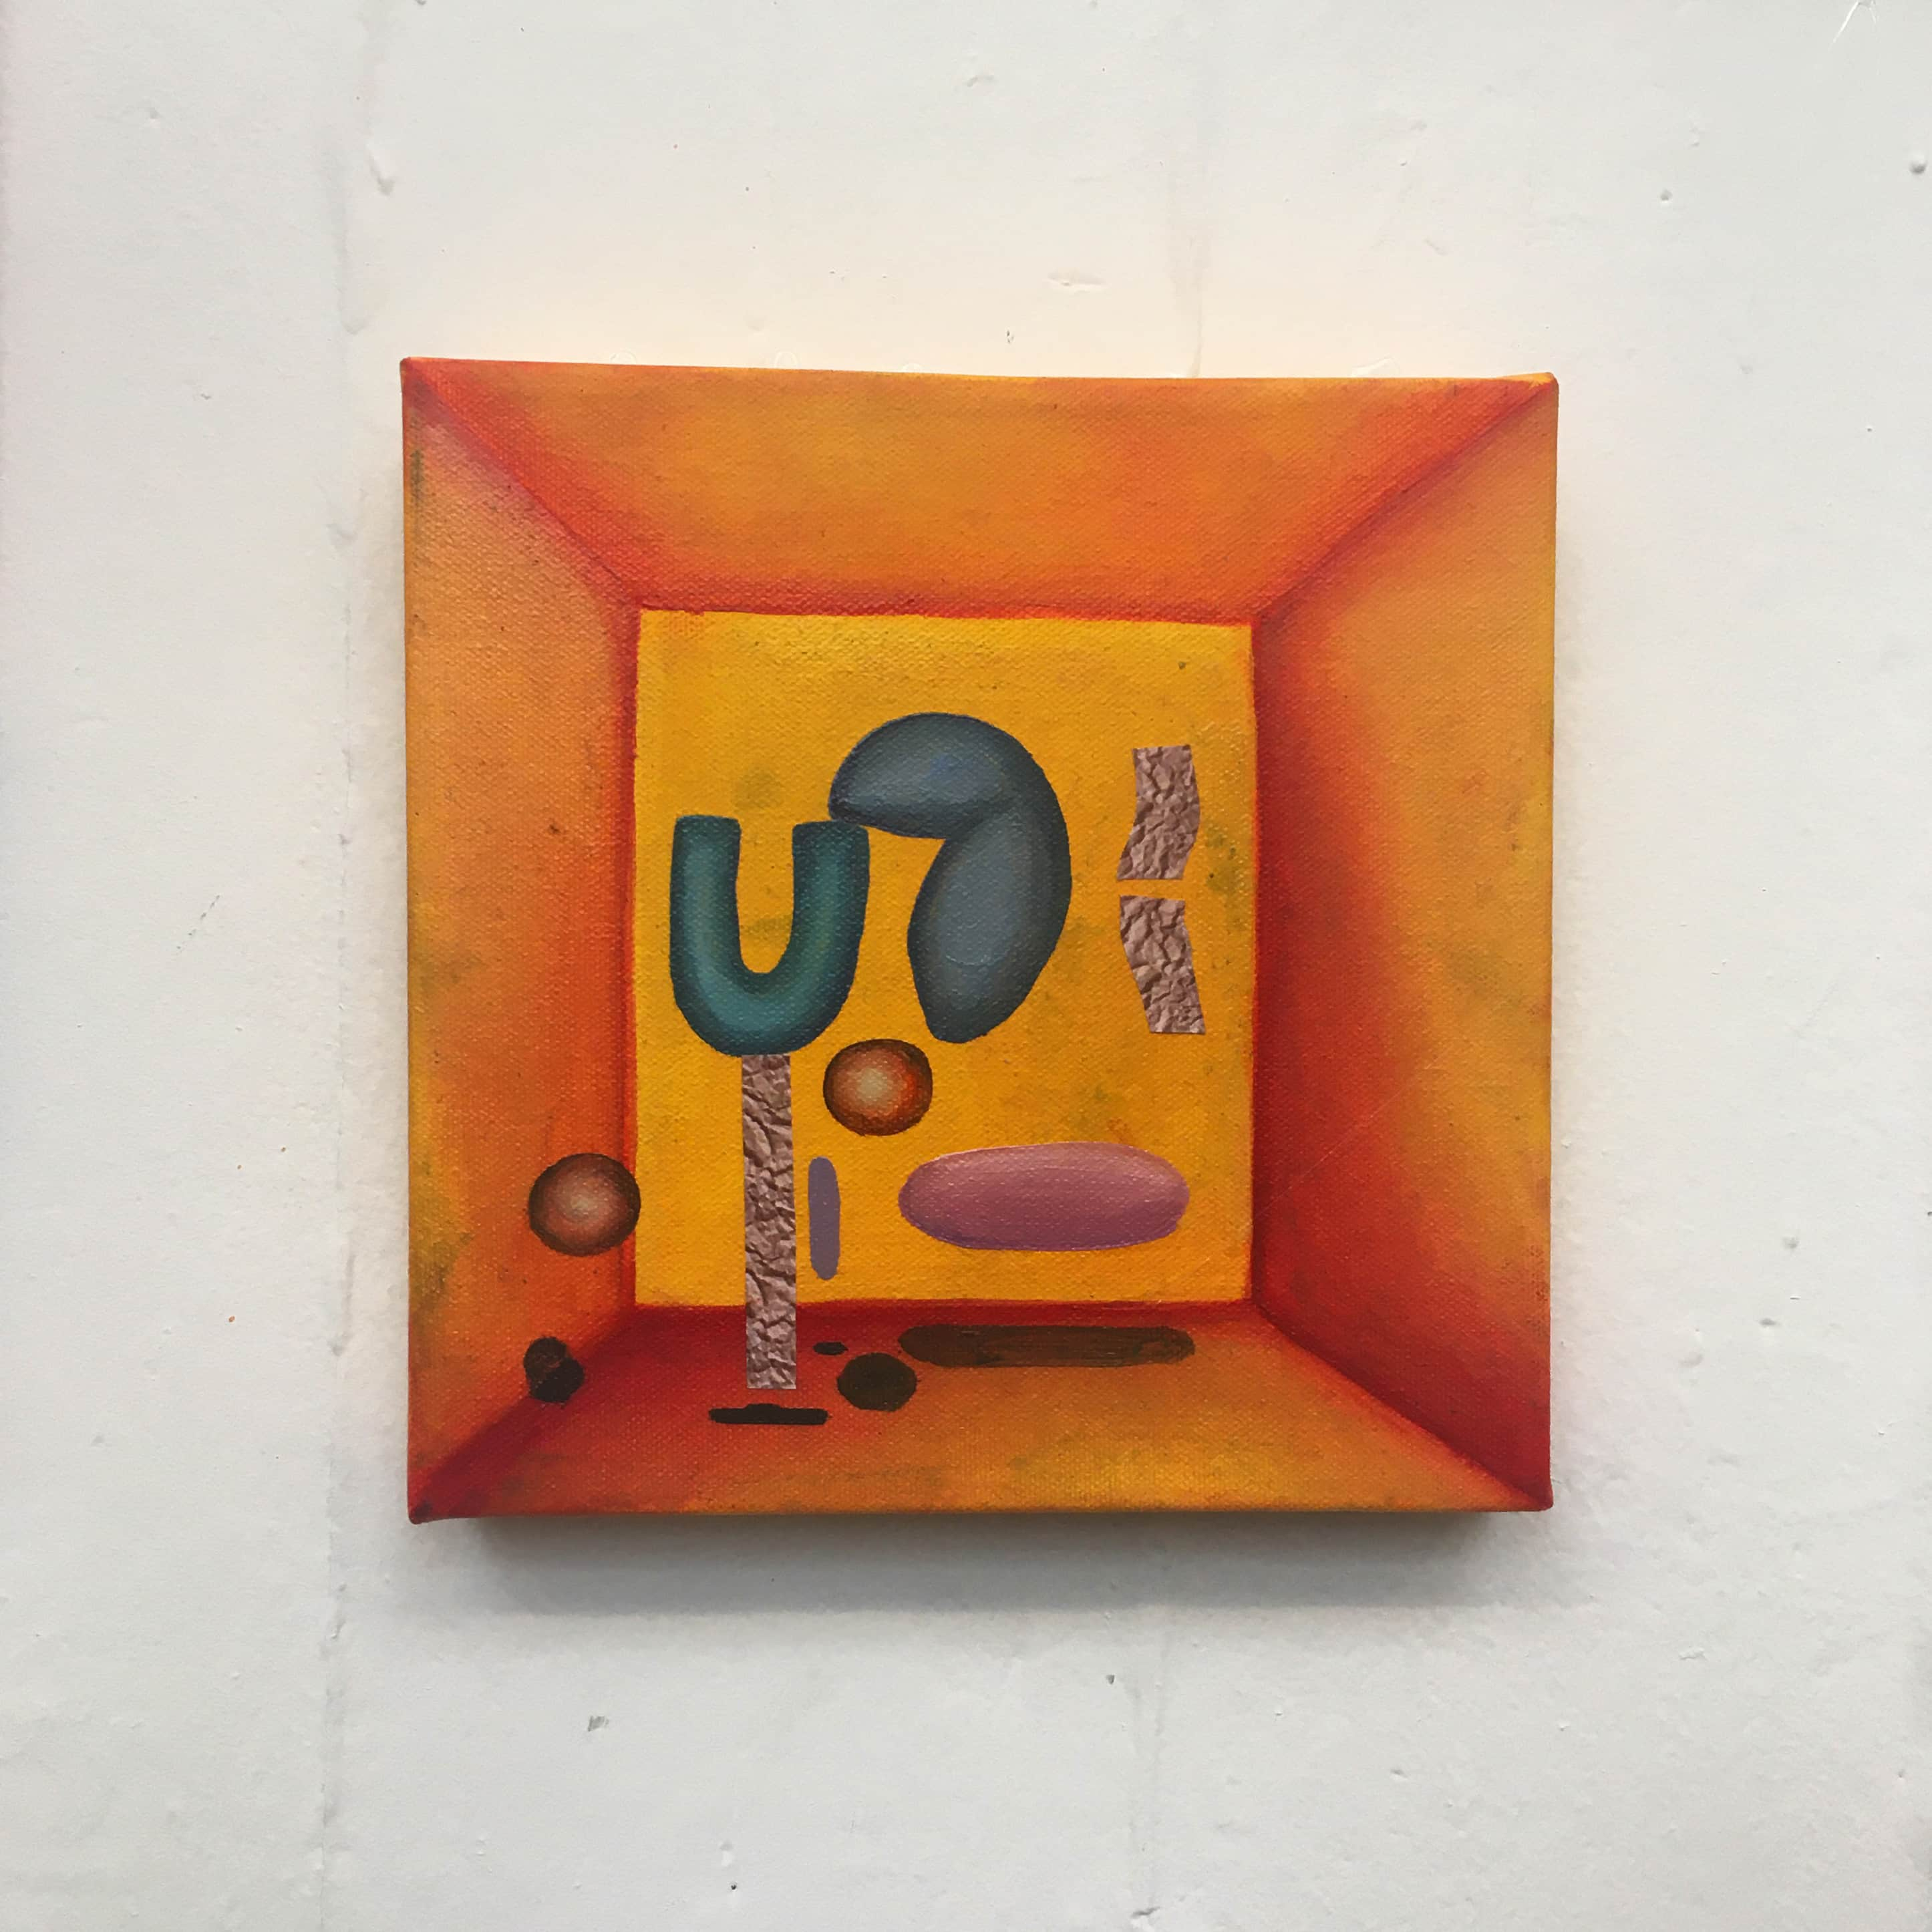 A painting of an orange/yellow room with odd blobs floating within. There are small strips of paper/sand texture around the blobs.